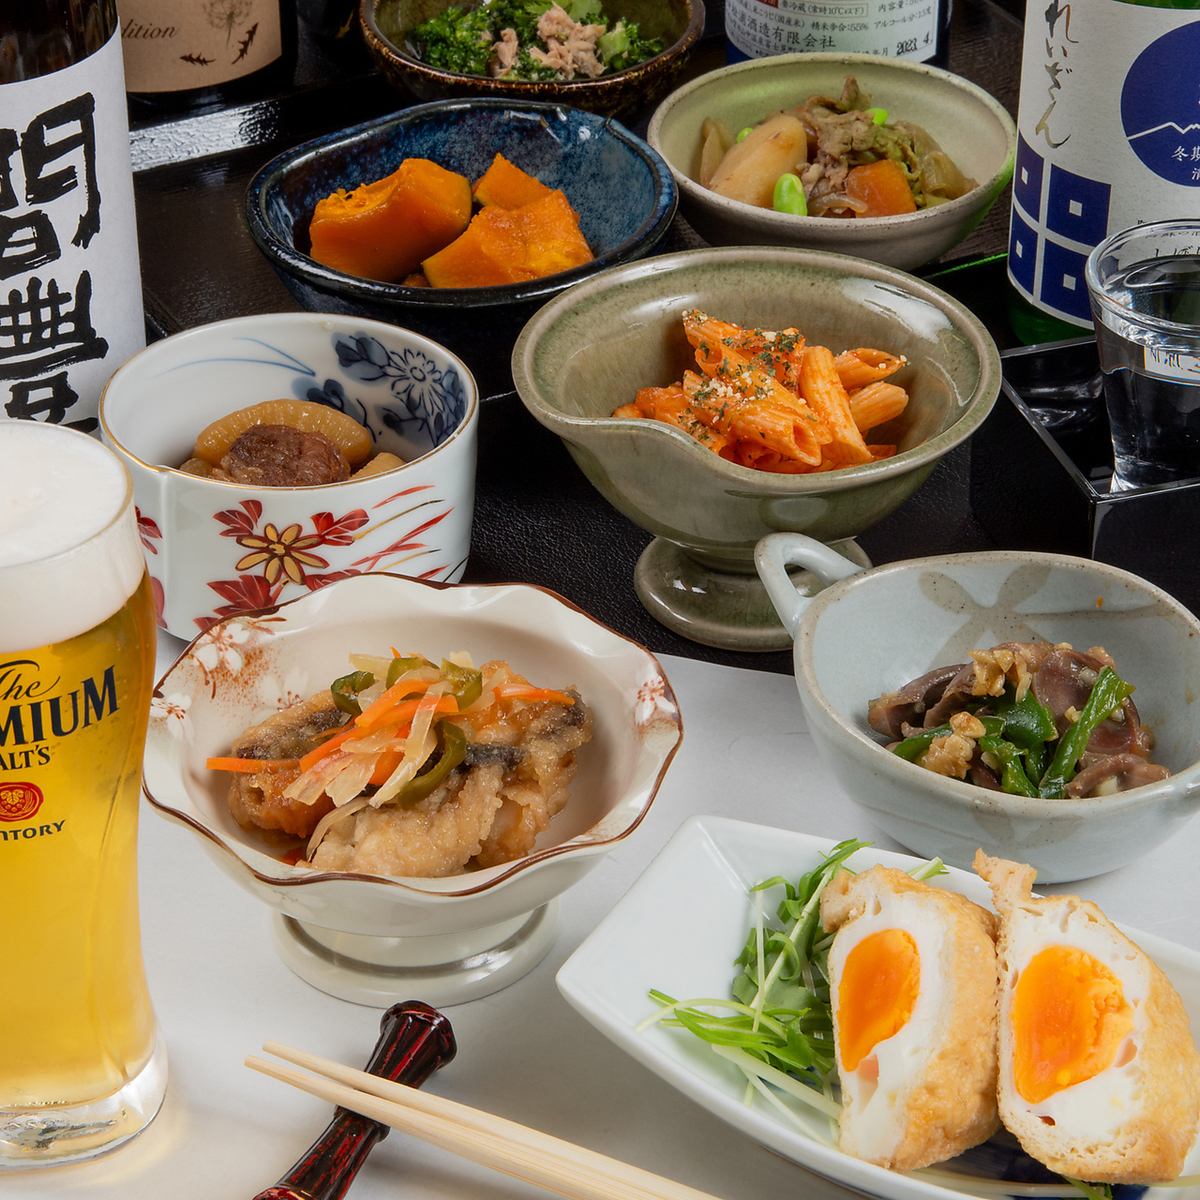 Enjoy warm Kyushu home cooking and obanzai that go well with a wide variety of local sake and Japanese sake.